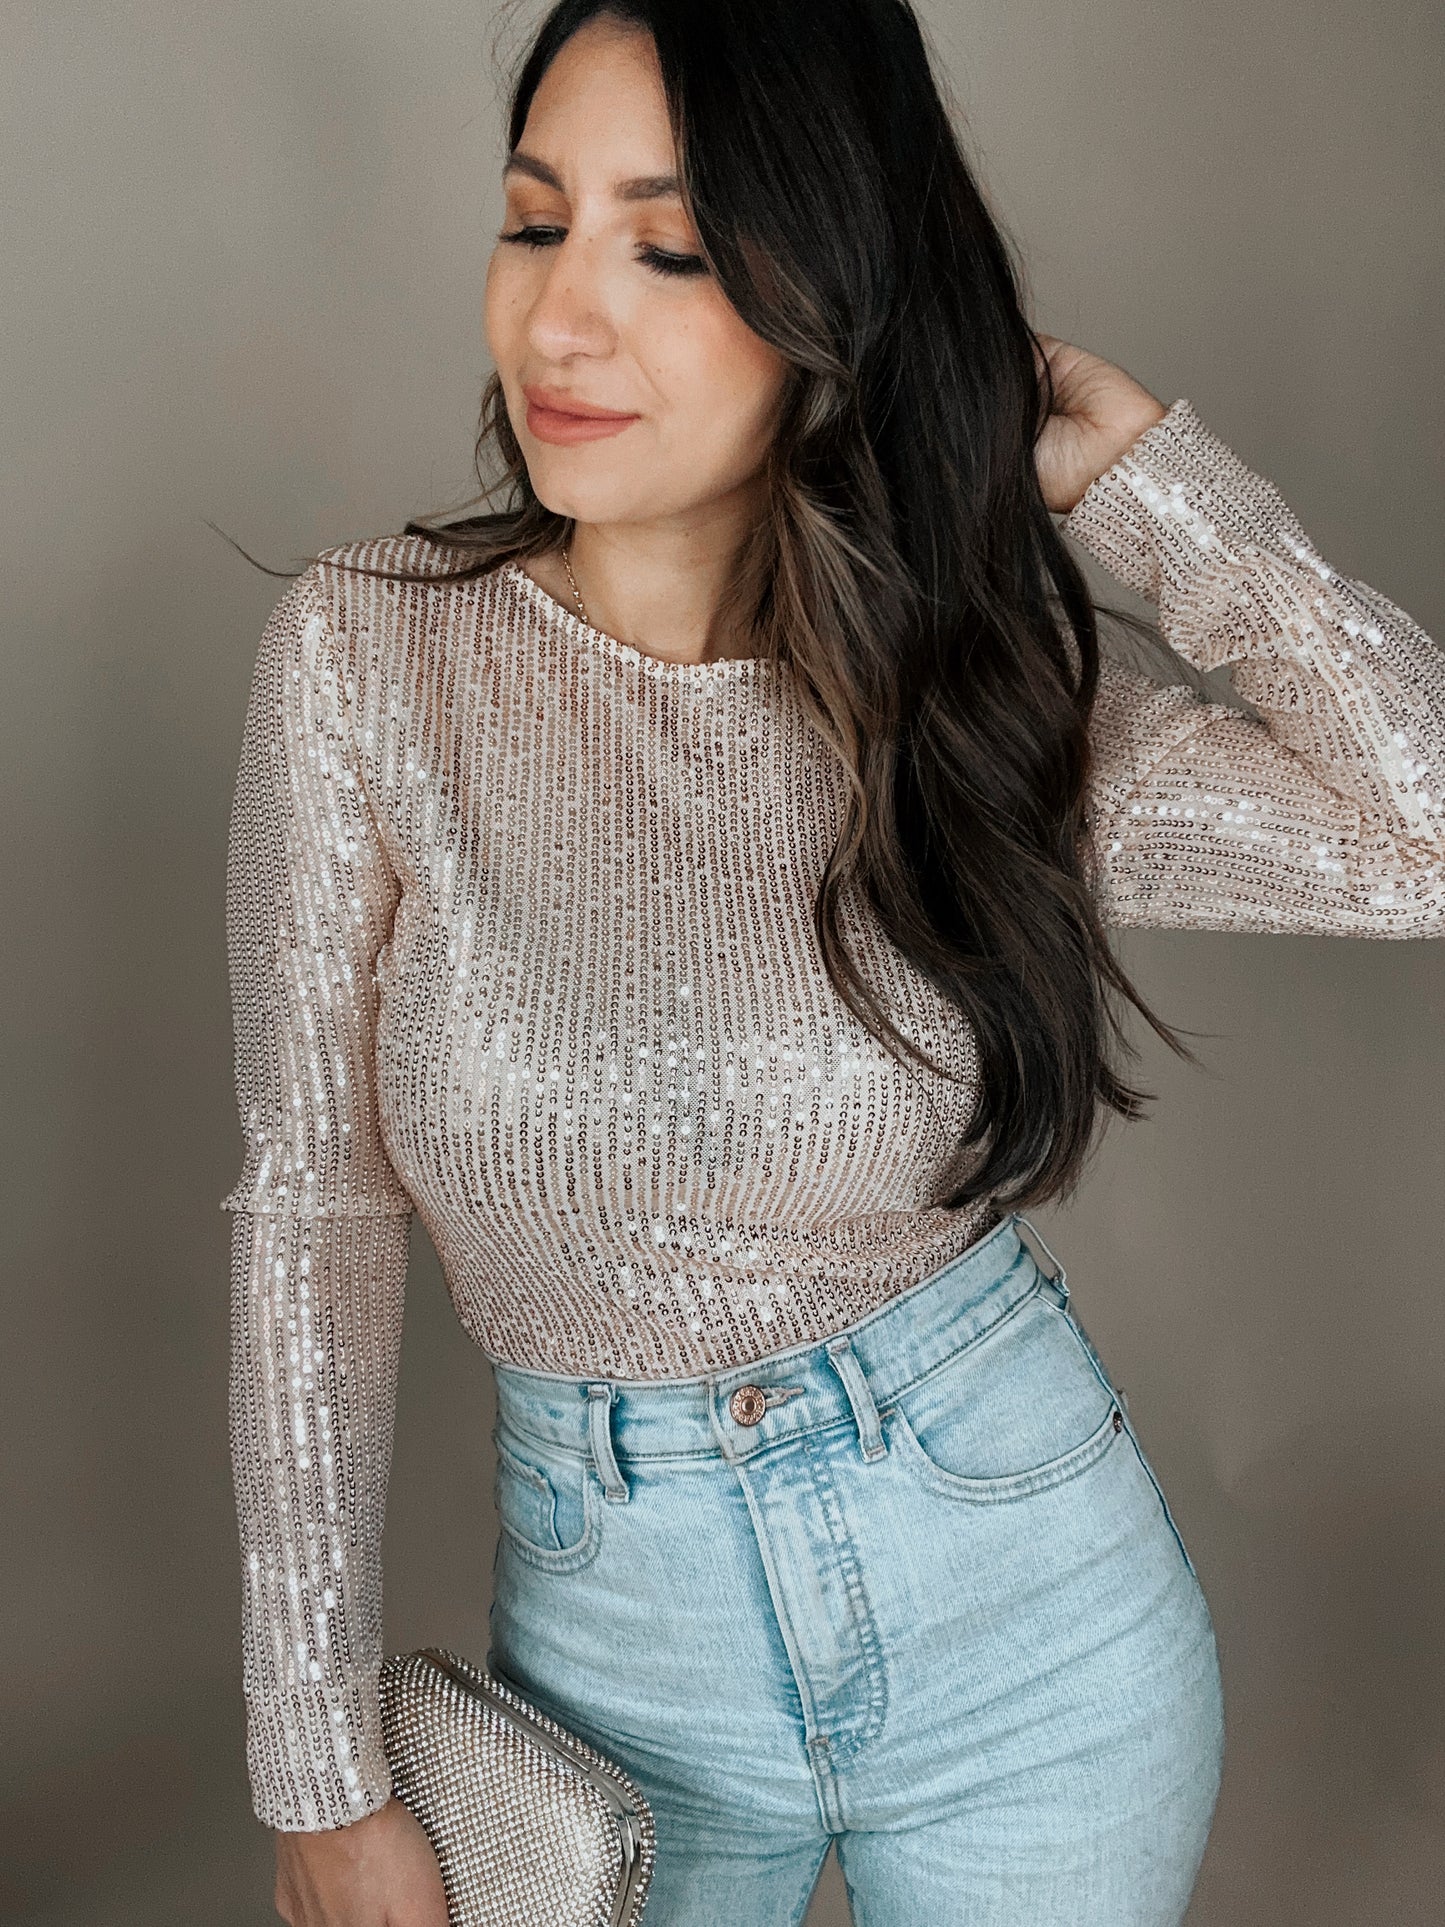 Rose Champagne Sequin Top